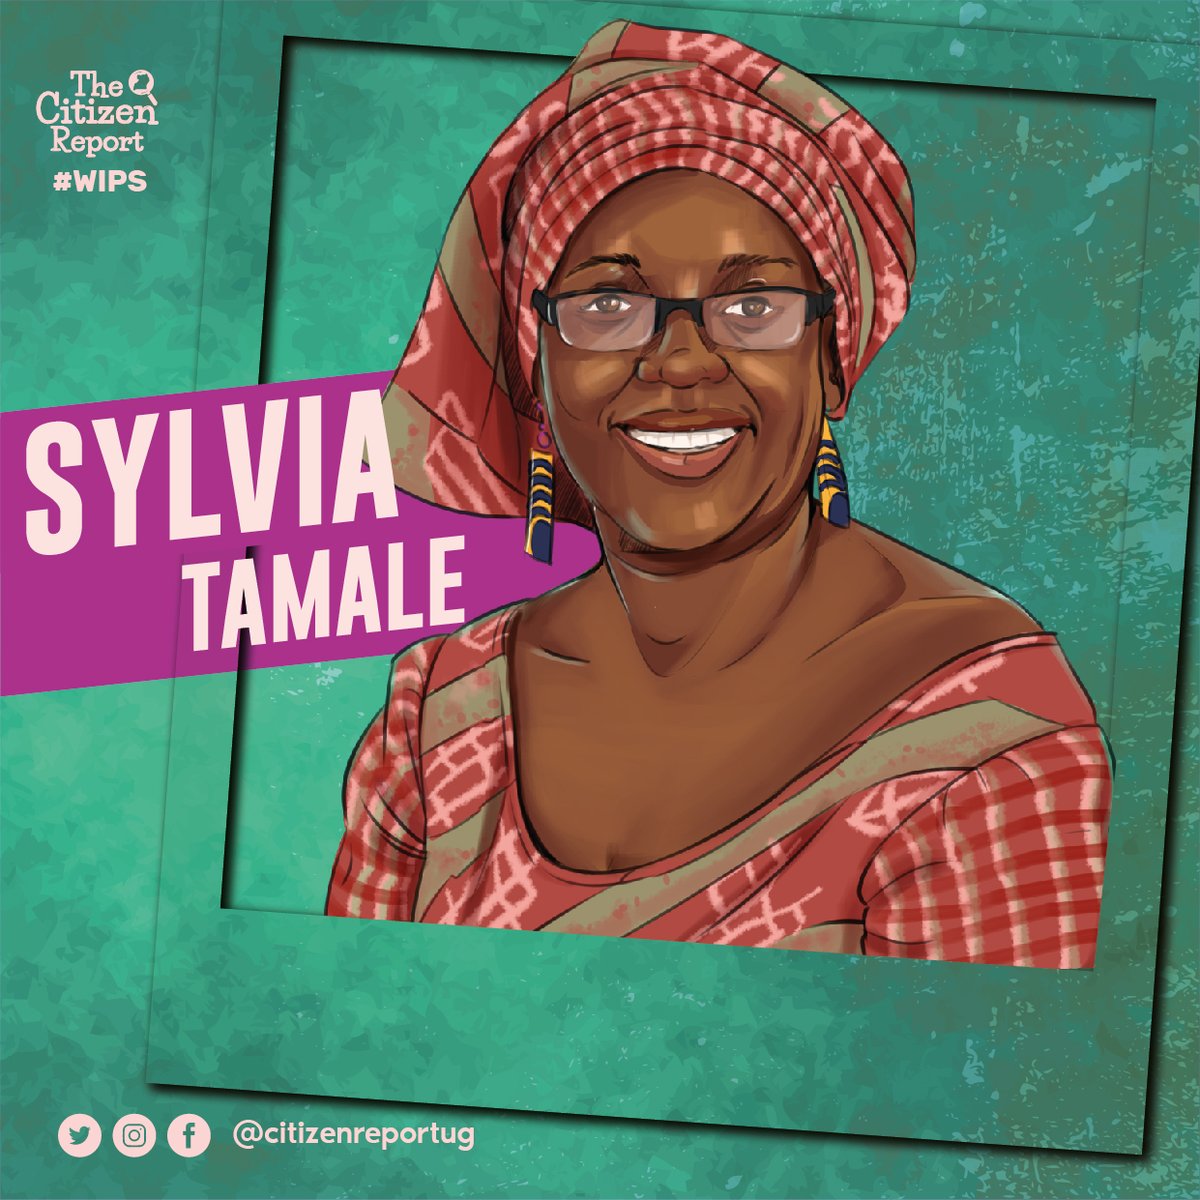 Sylvia Tamale was born in 1962. She studied at Budo Junior School (1969-1975), Gayaza High School (1976-1982), and then joined Makerere University in 1982 where she completed her Bachelor of Laws degree with honours. In 1988, she completed a Master of Laws degree at Harvard